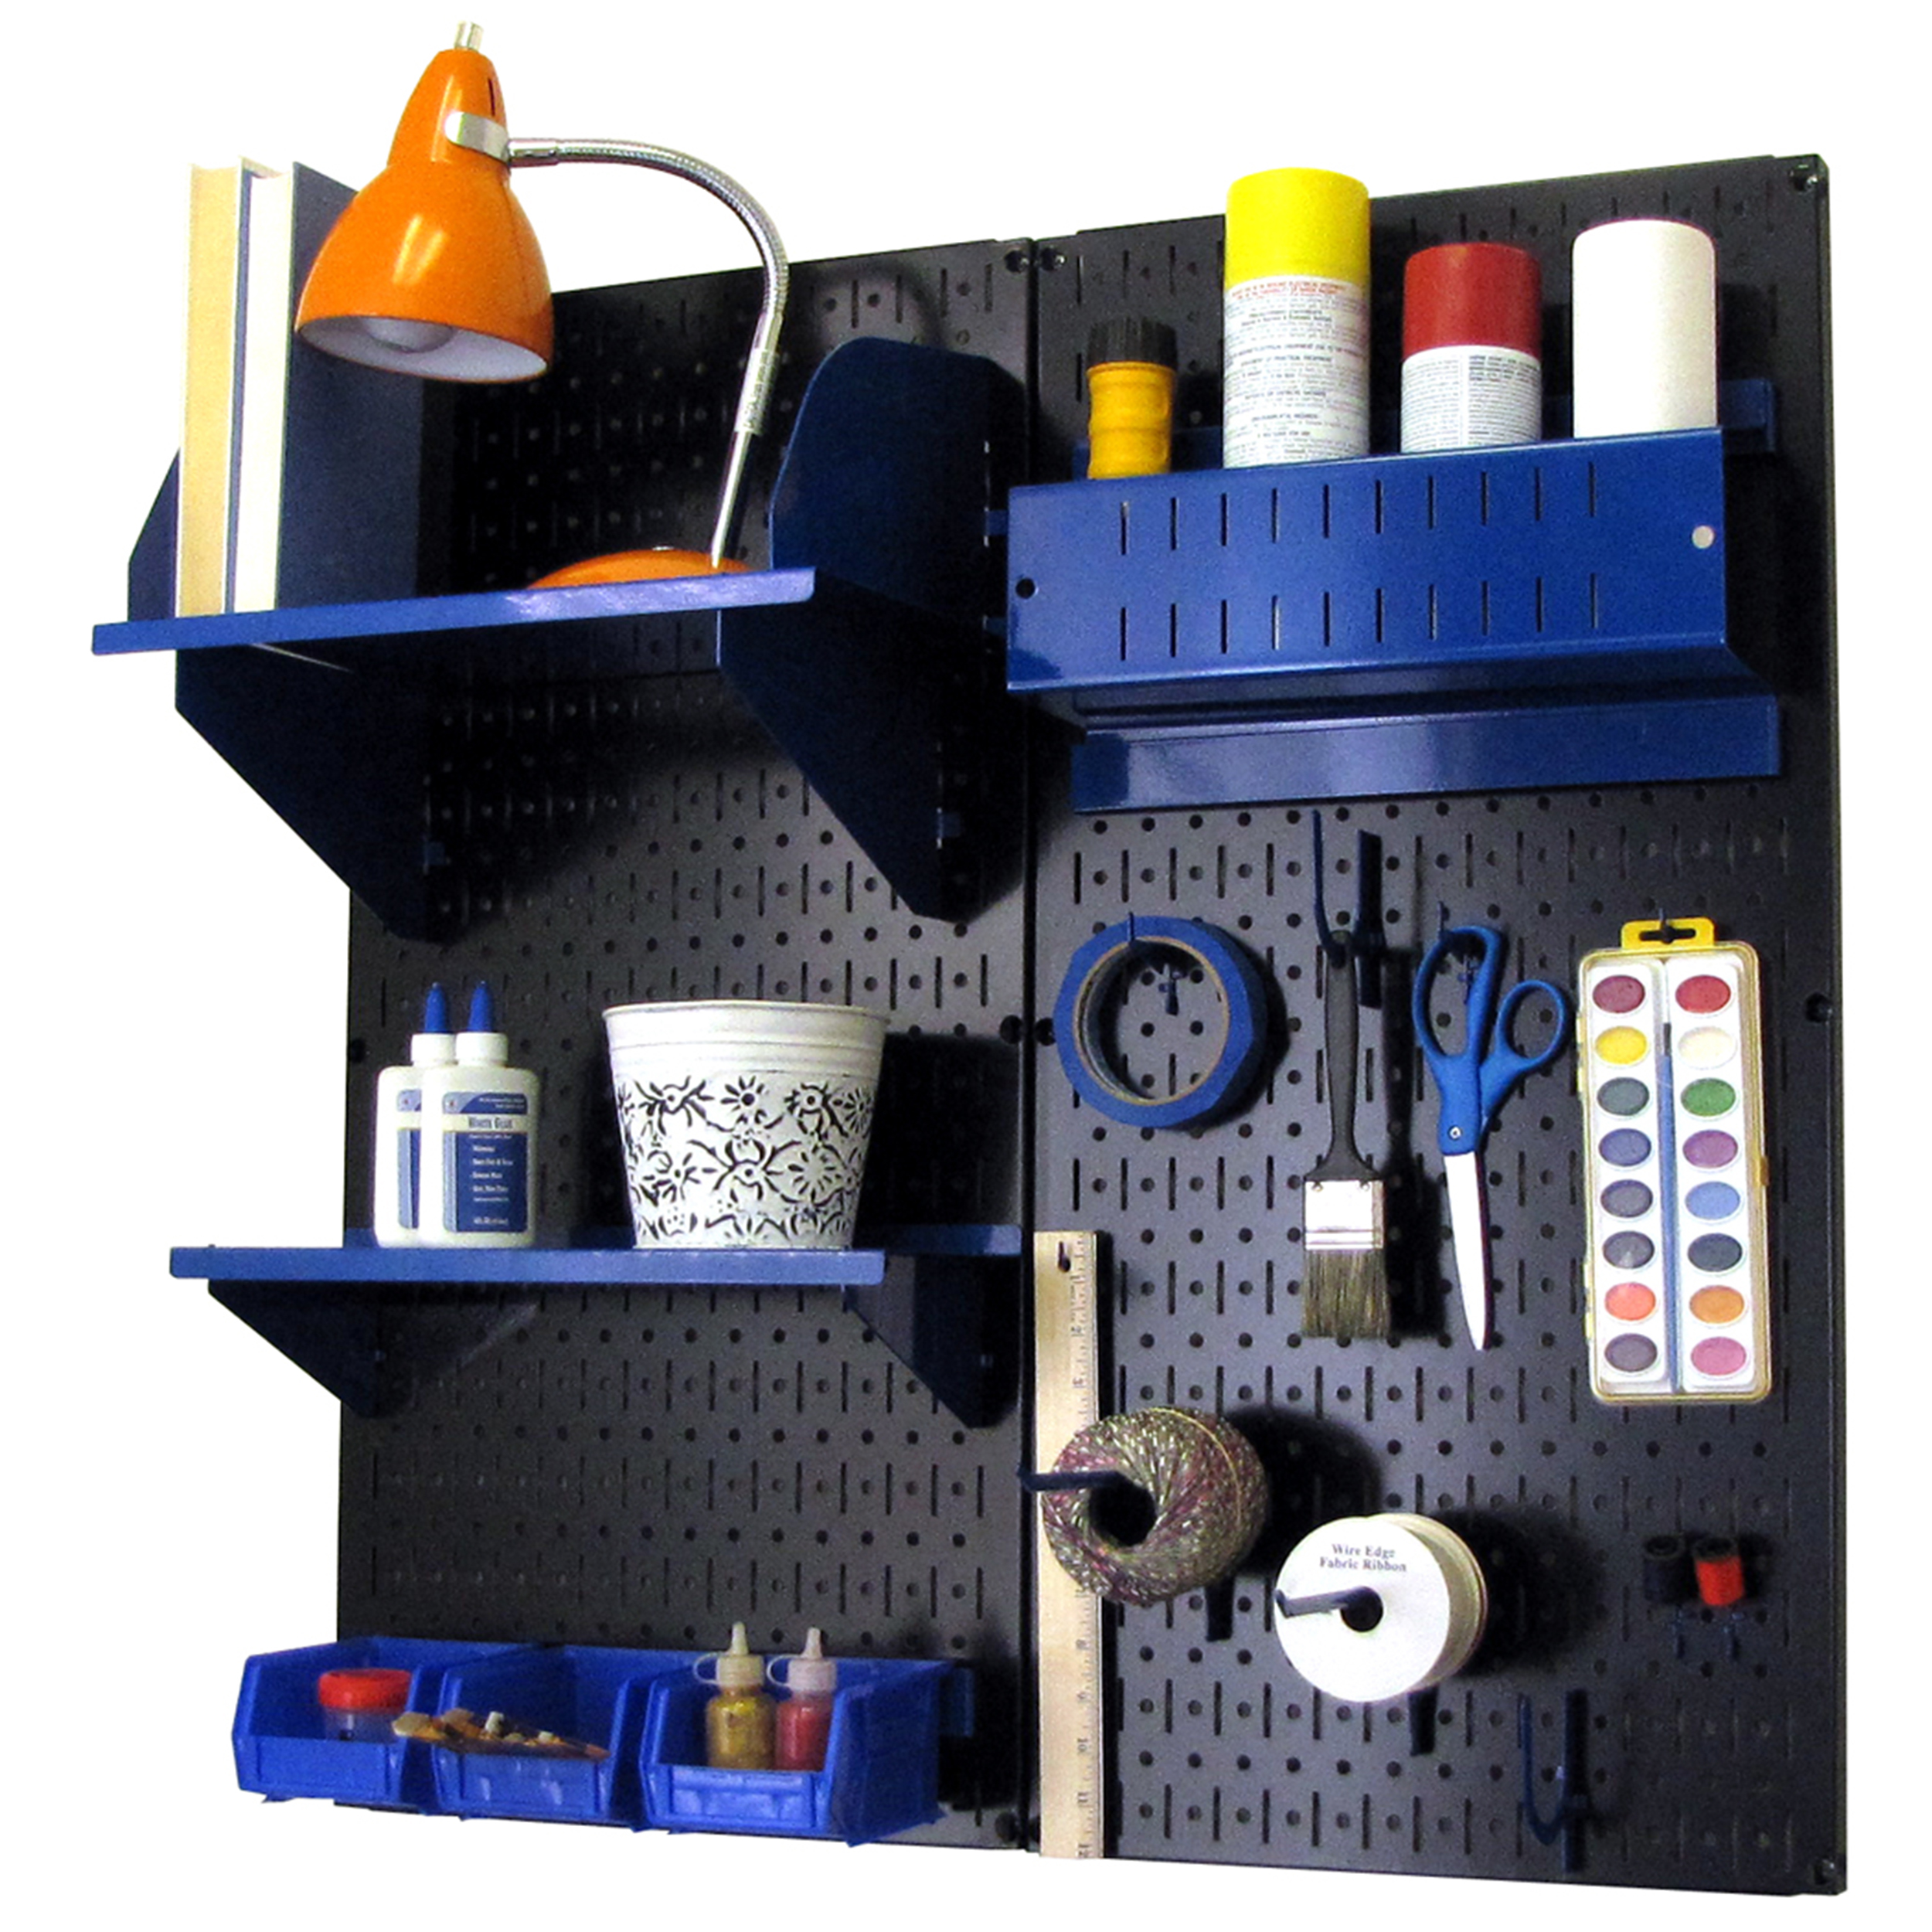 Pegboard Hobby Craft Pegboard Organizer Storage Kit With Black Pegboard And Blue Accessories